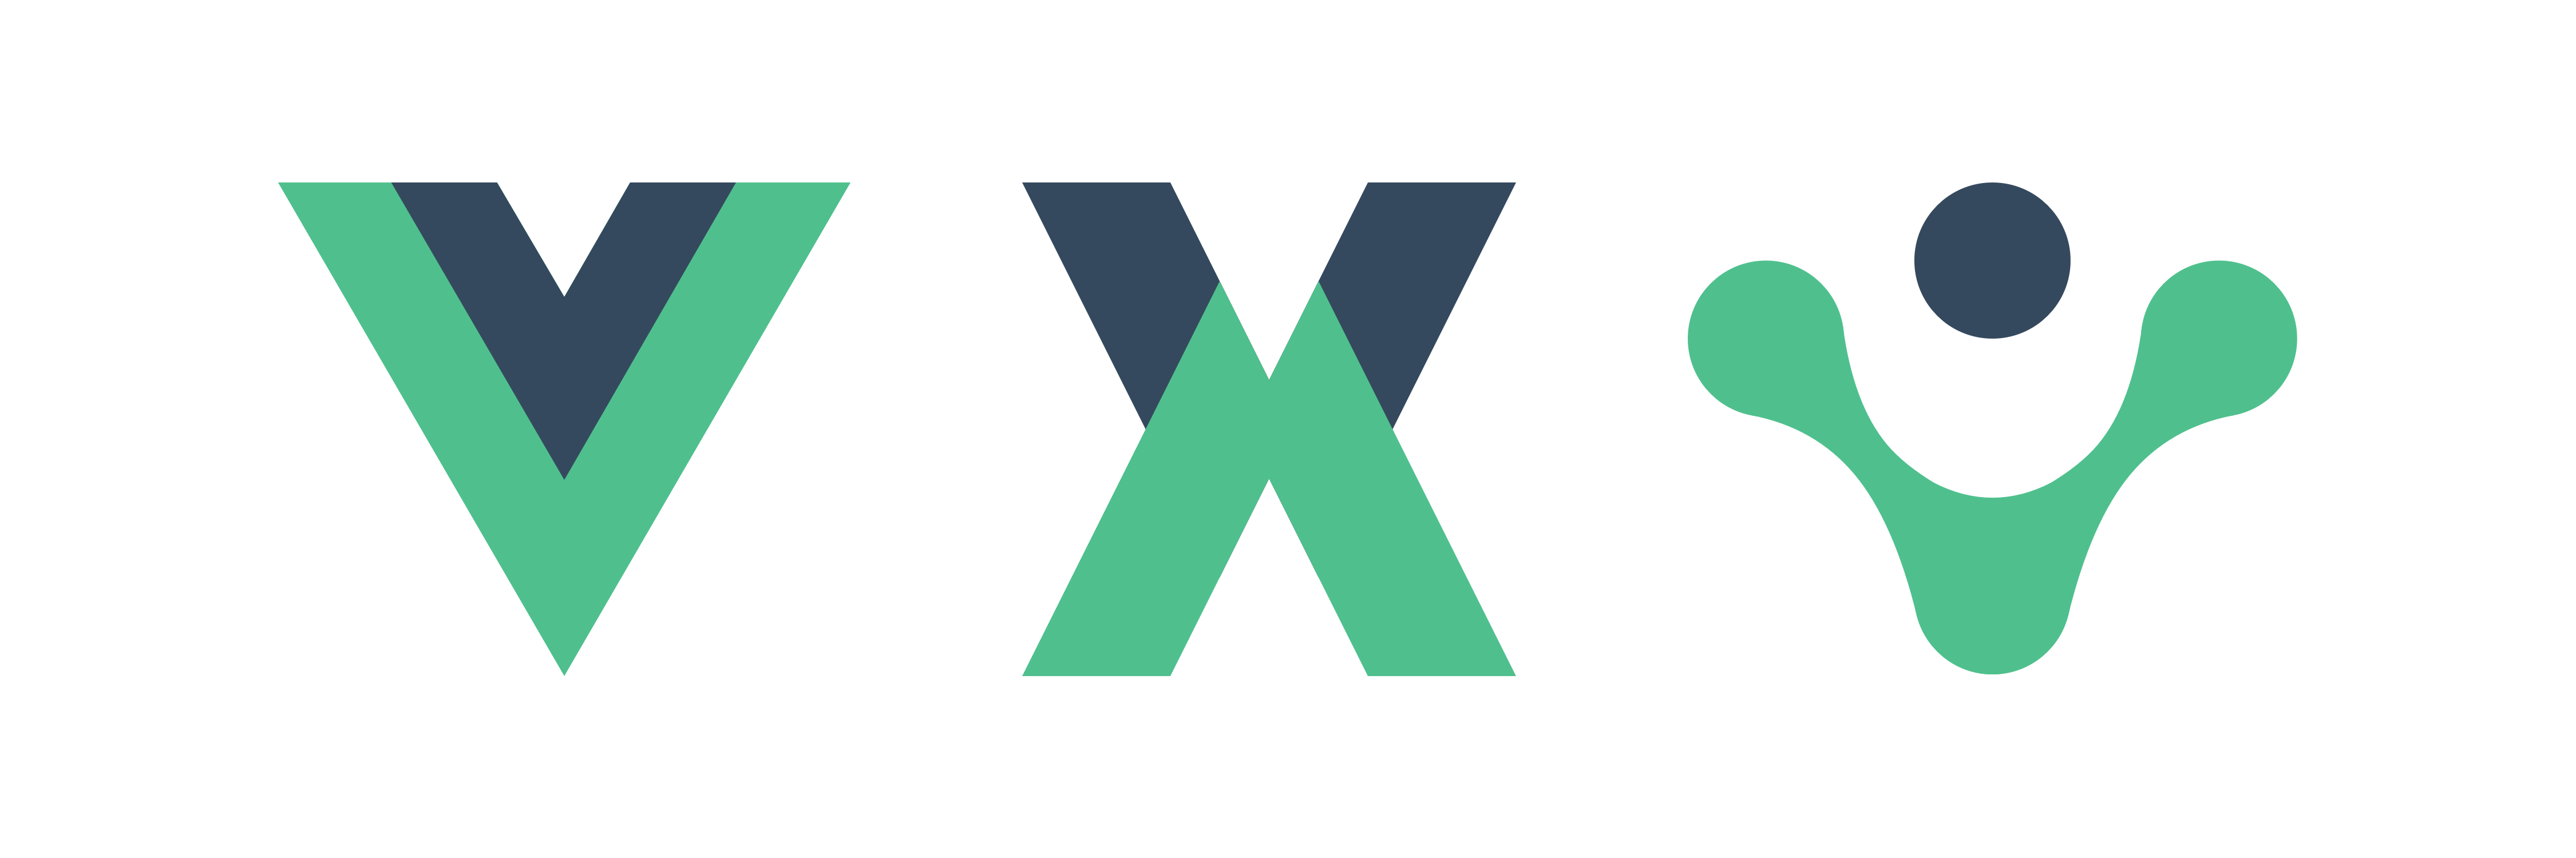 Vue Logo - Logos for Vuex and Vue-Router? · Issue #6305 · vuejs/vue · GitHub